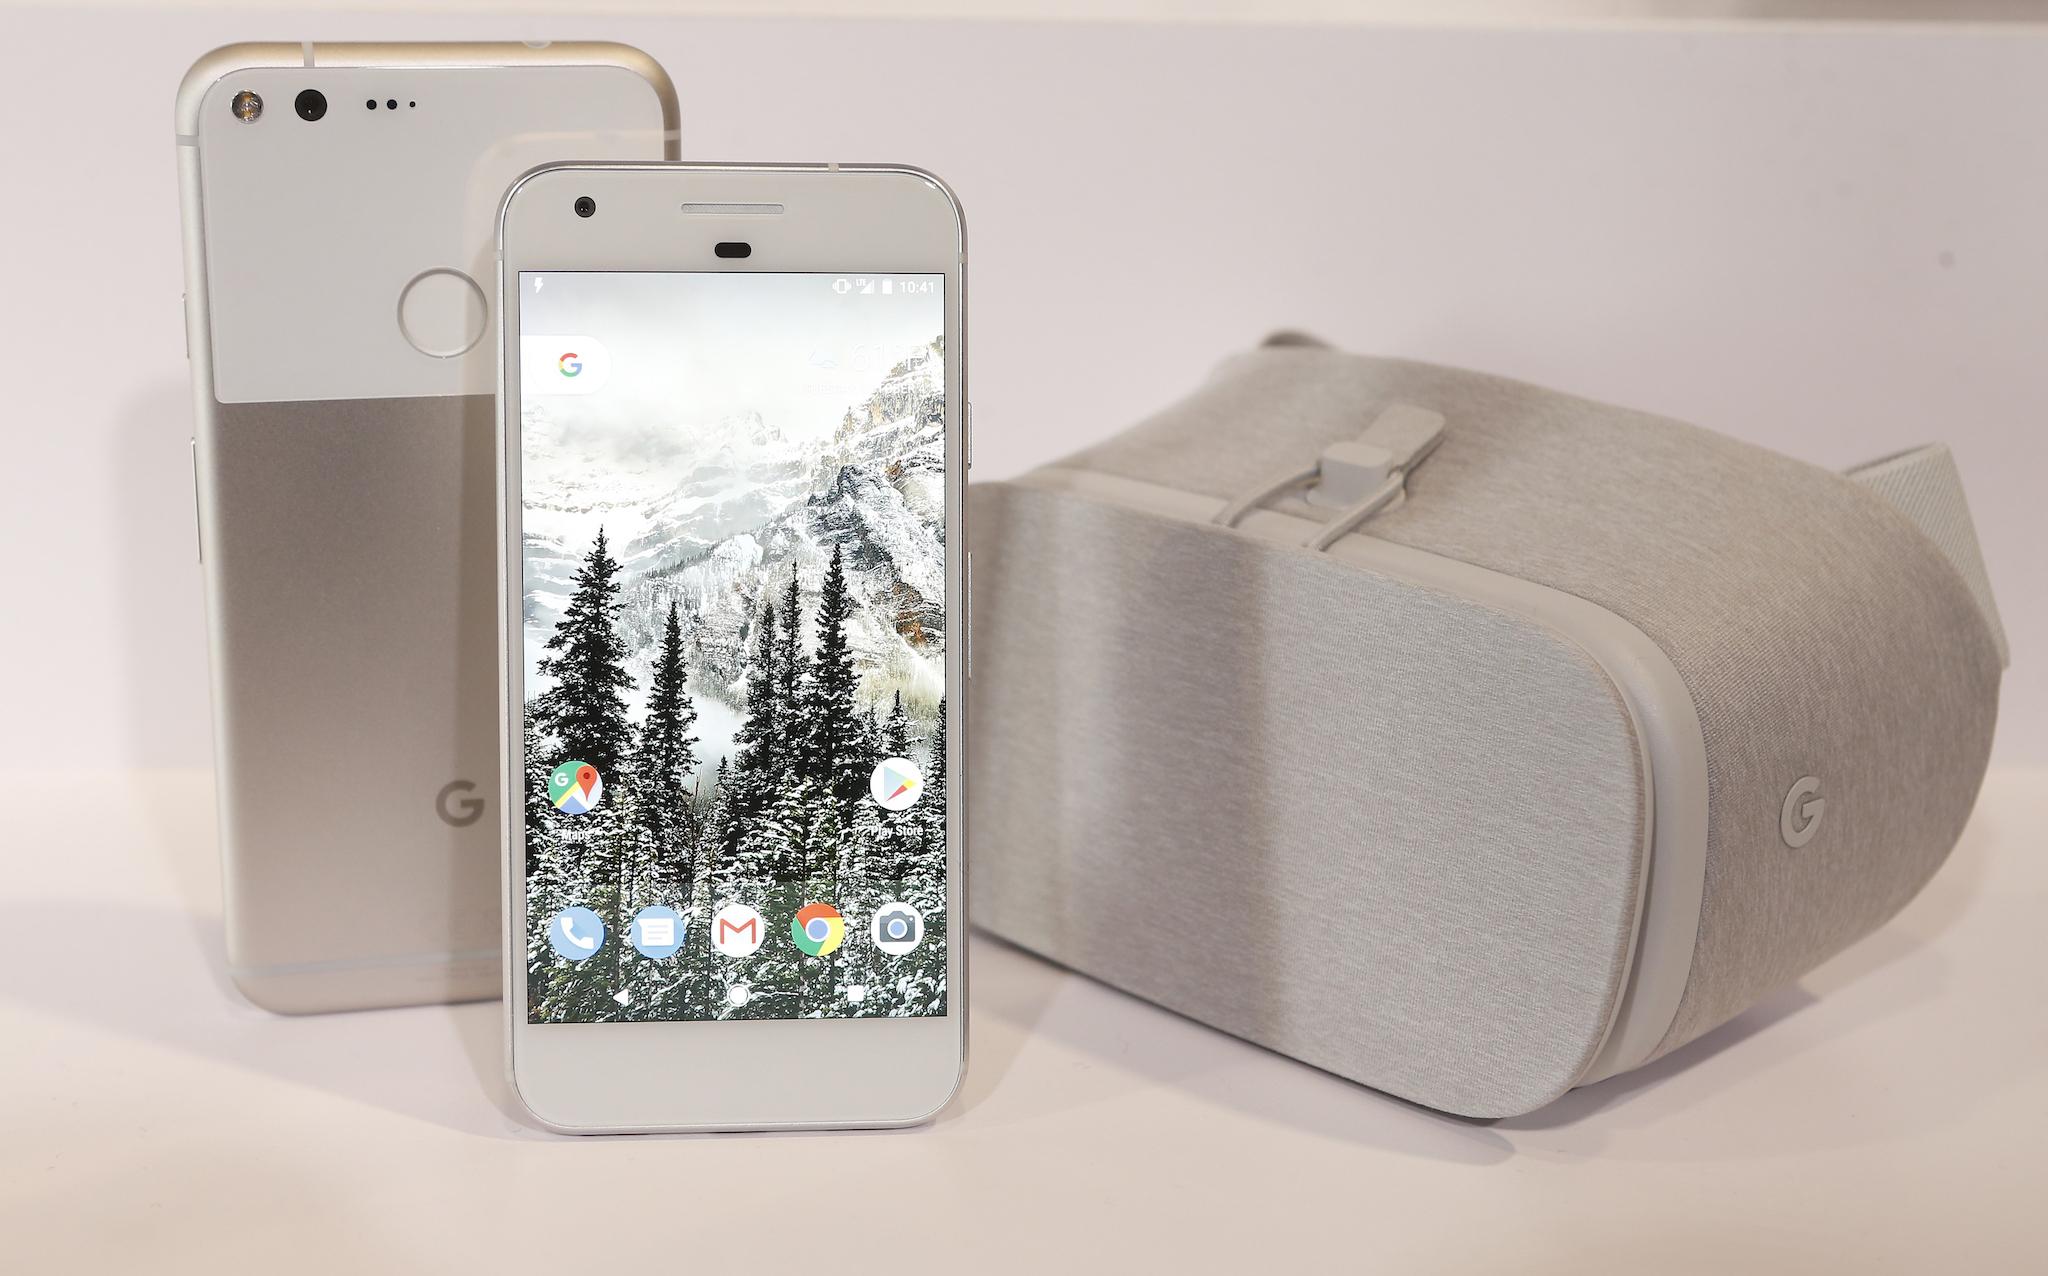 The original Google Pixel phones and the Google Daydream View VR viewer are displayed during the presentation of Google hardware in San Francisco, California, 2016